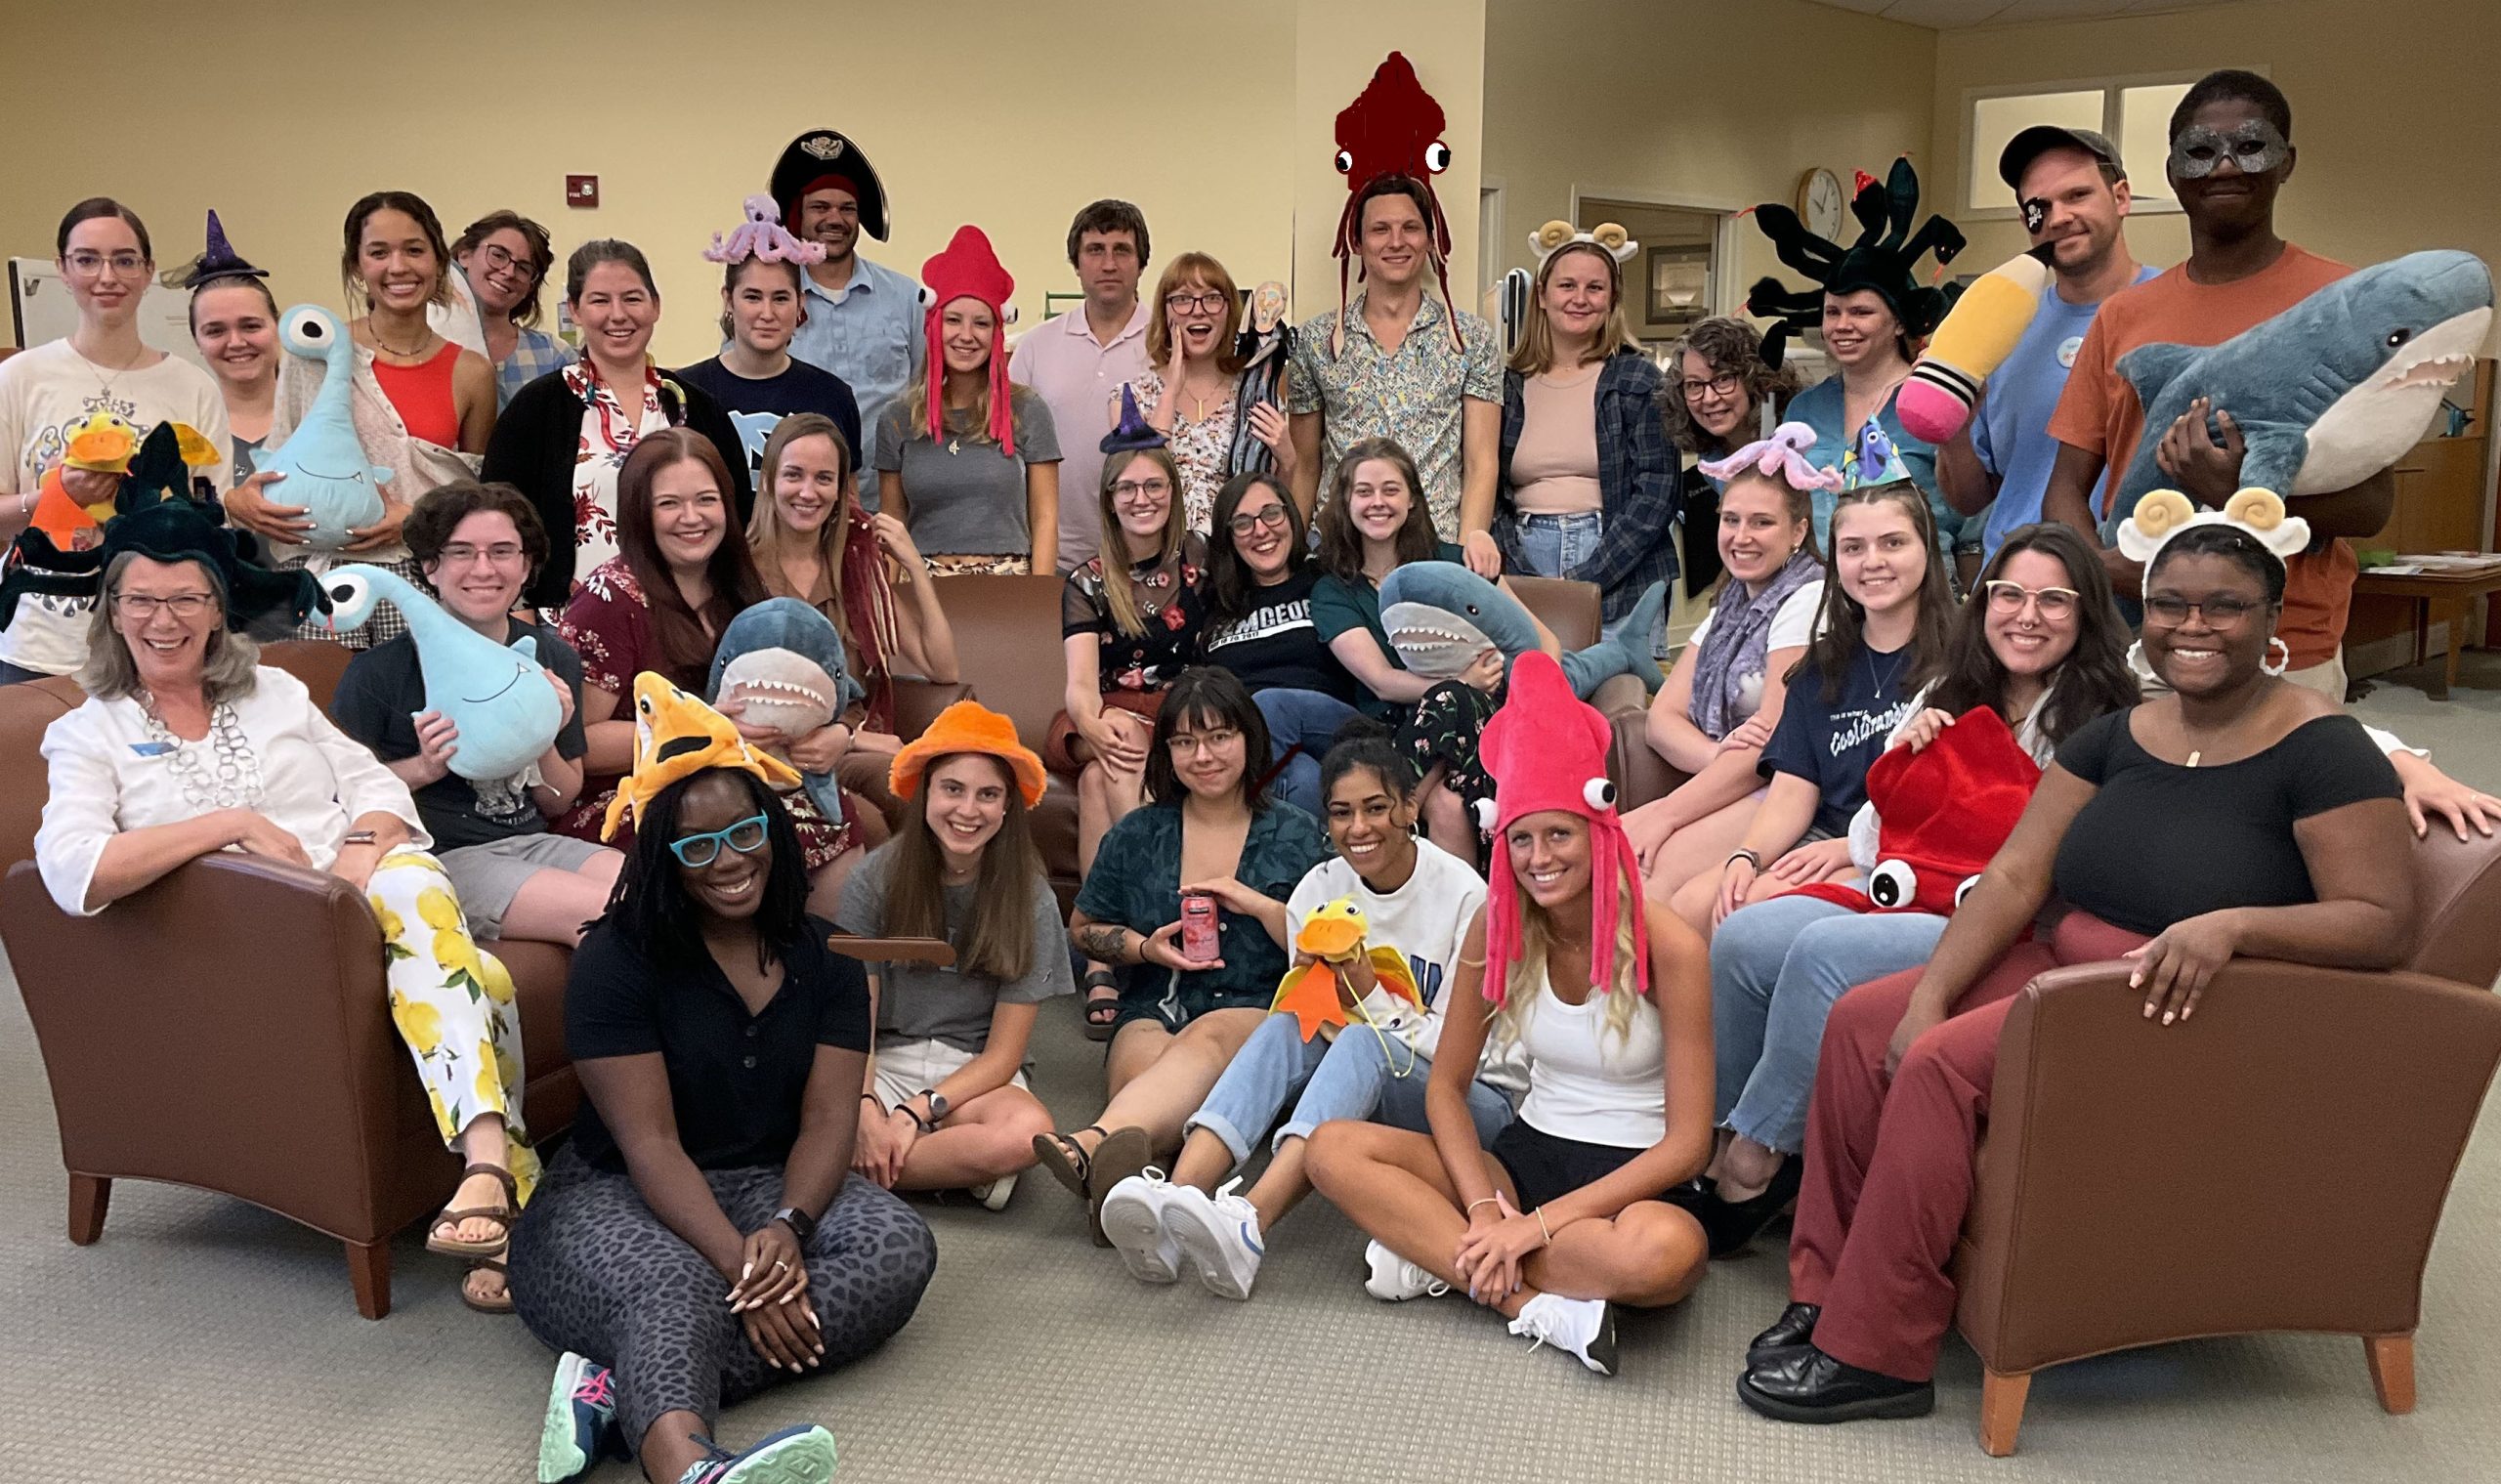 A photo of writing center staff posing together in a group photo. There are about 30 people clustered together over two couches, with some people standing behind the couches and a few people sitting on the floor. Many people are wearing silly hats or holding stuffed animal toys.